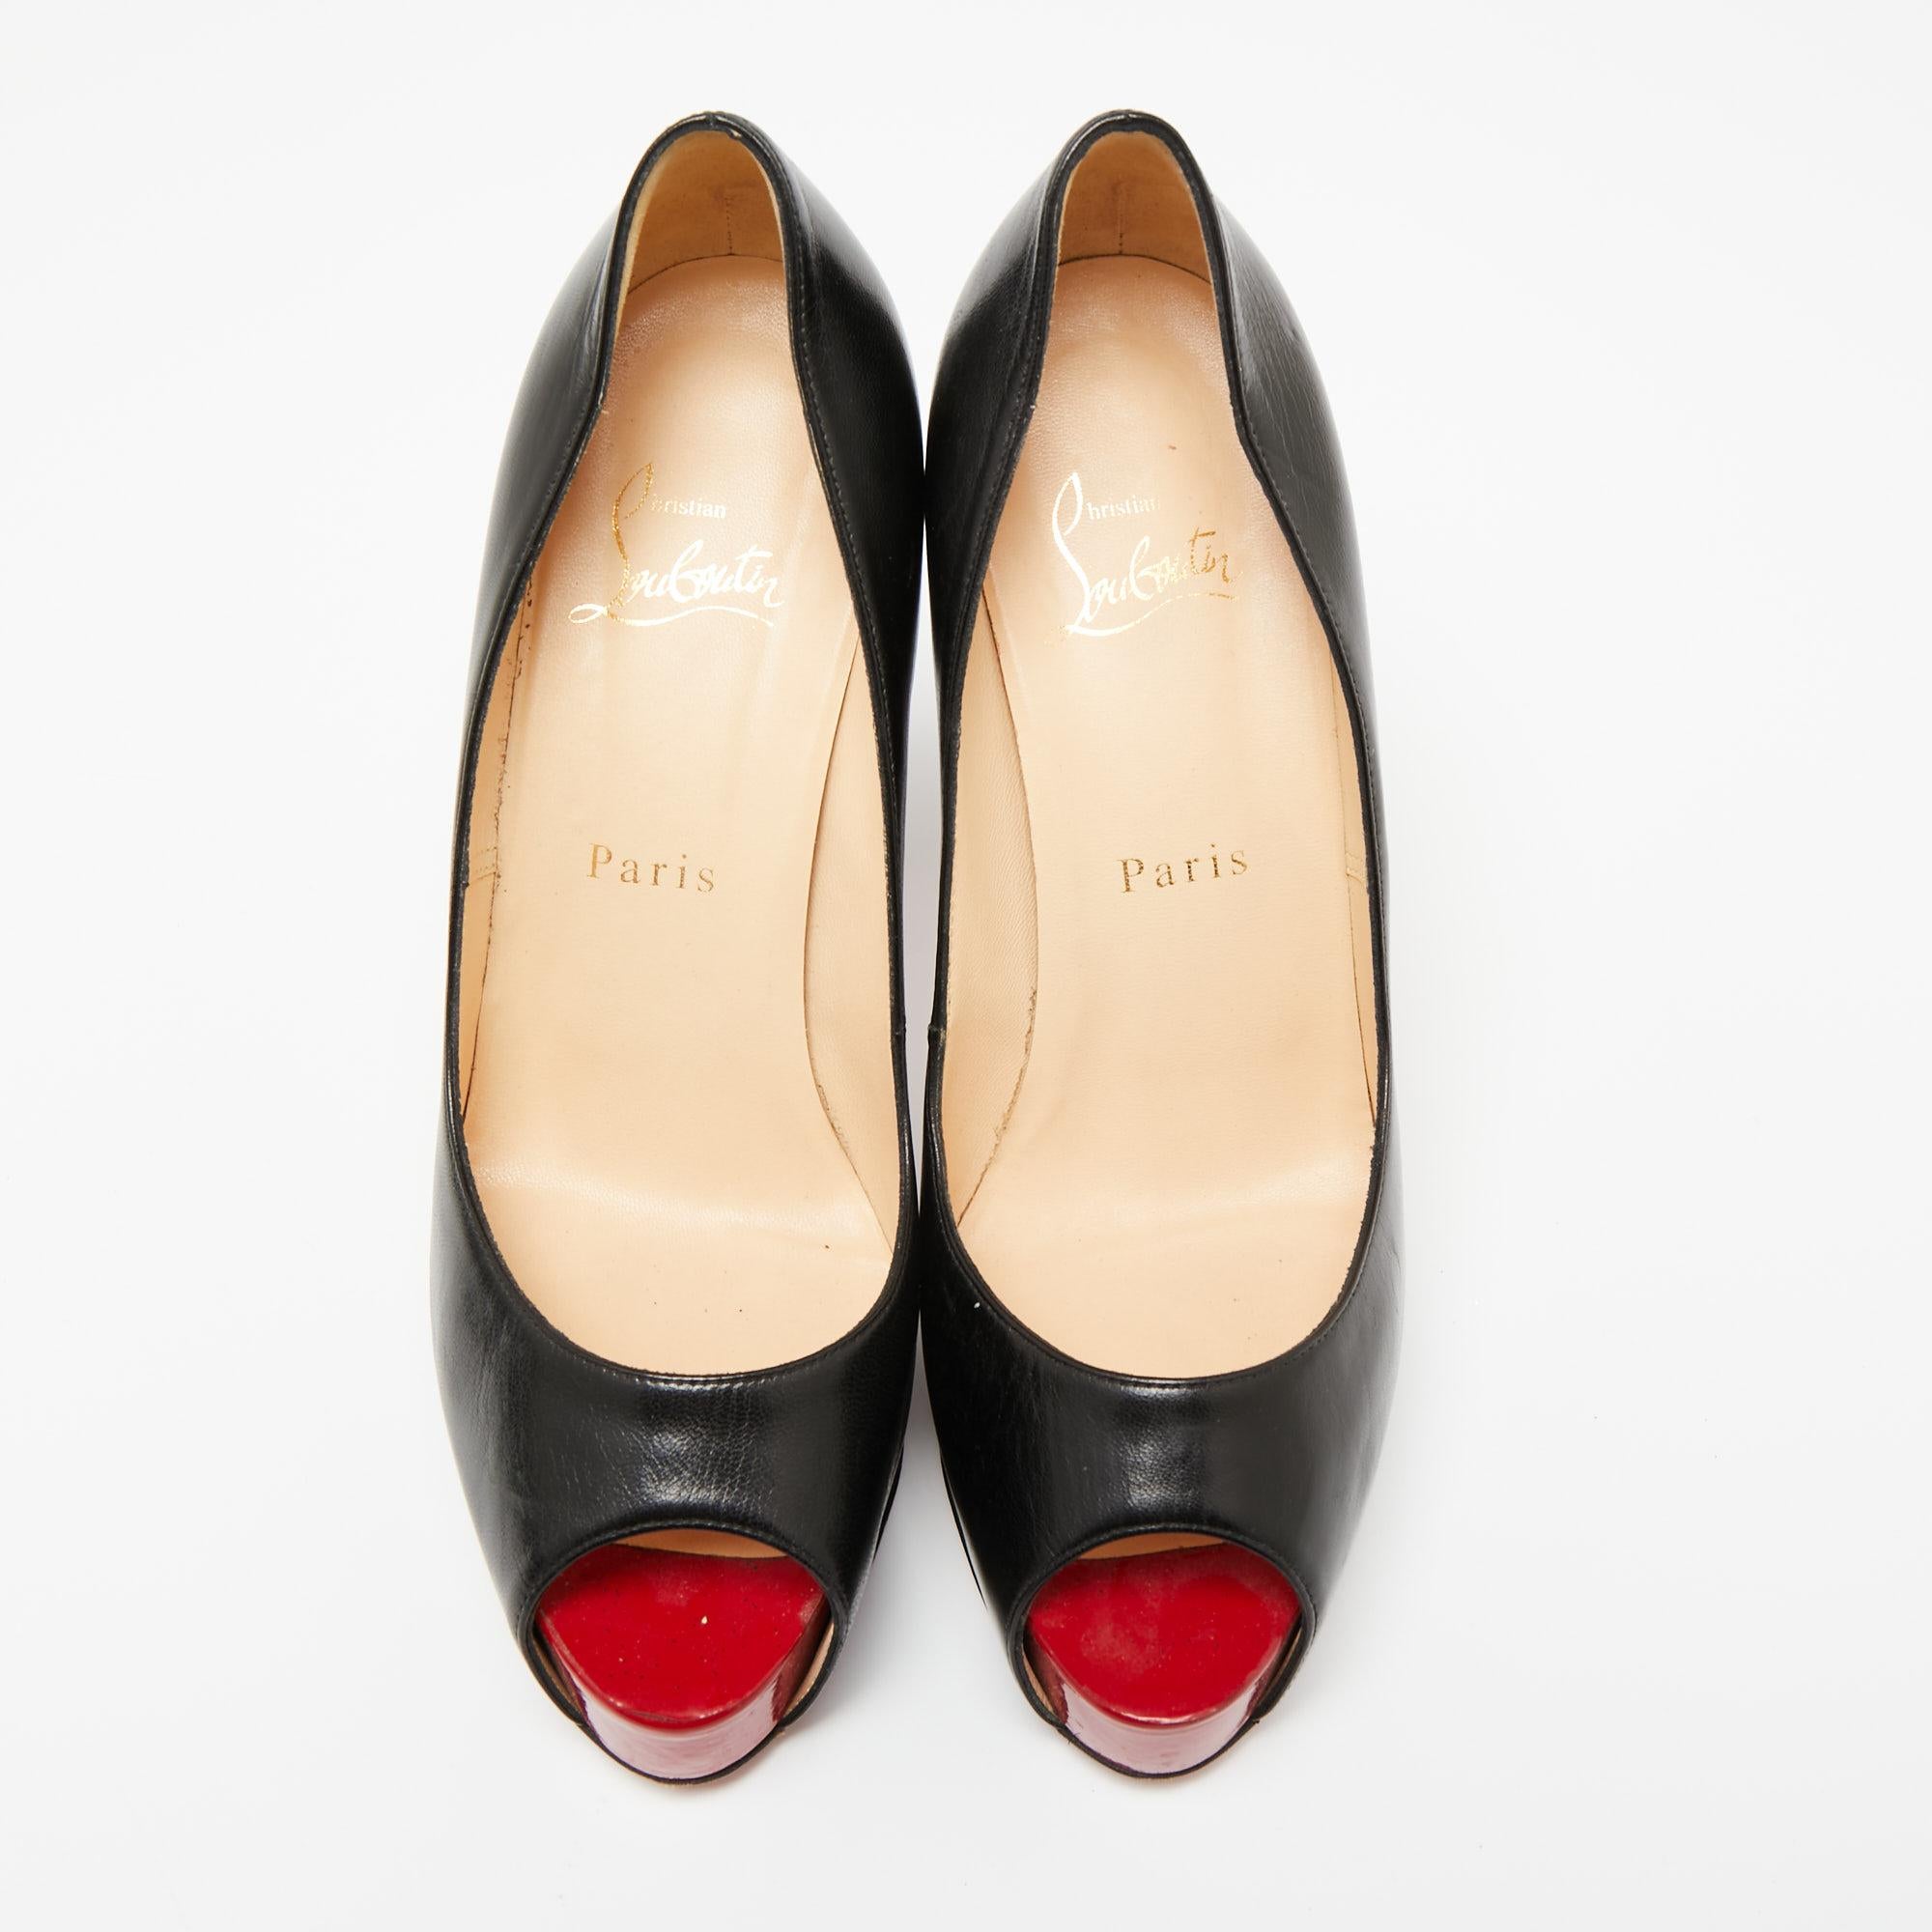 The architectural silhouette and precise cuts of this pair of pumps from Christian Louboutin exemplify the brand's mastery in the art of stiletto making. Finely created from leather, it is detailed with 12cm heels and peep toes. The signature